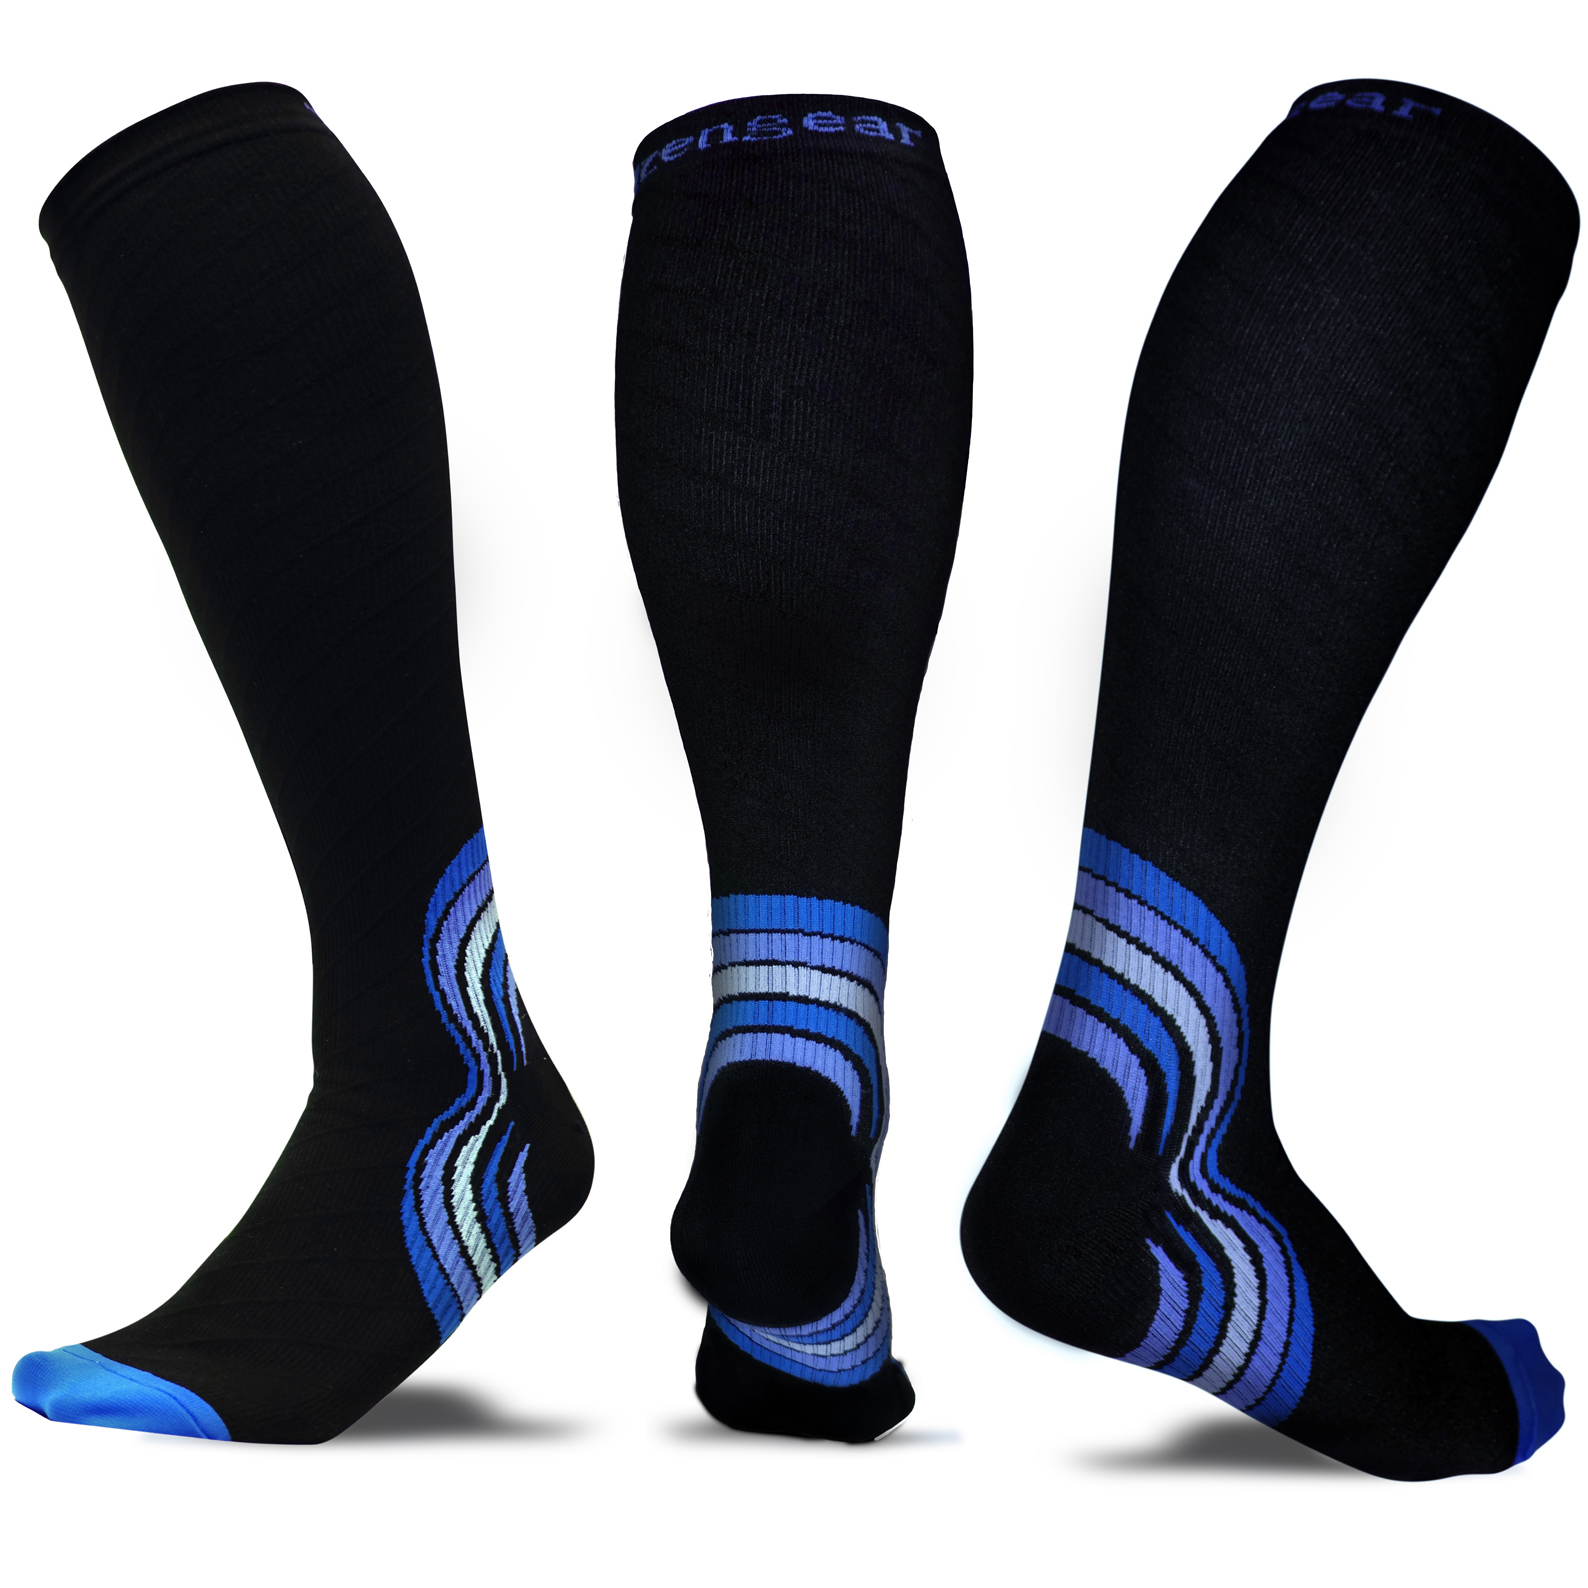 aZengear Launch Stylish and Effective Graduated Compression Socks with ...